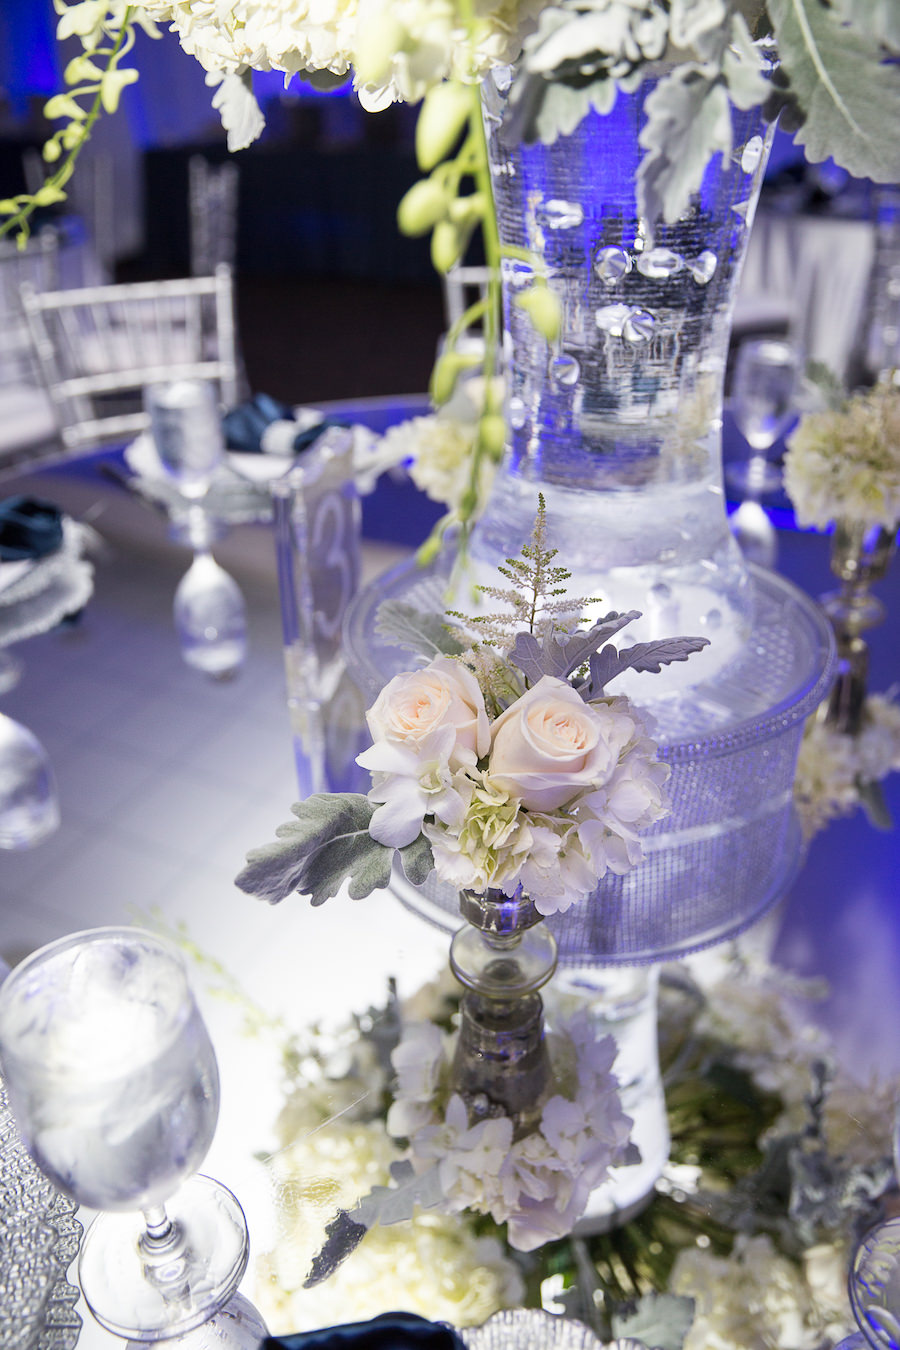 Wedding Reception Table Decor with Ivory Floral Centerpieces